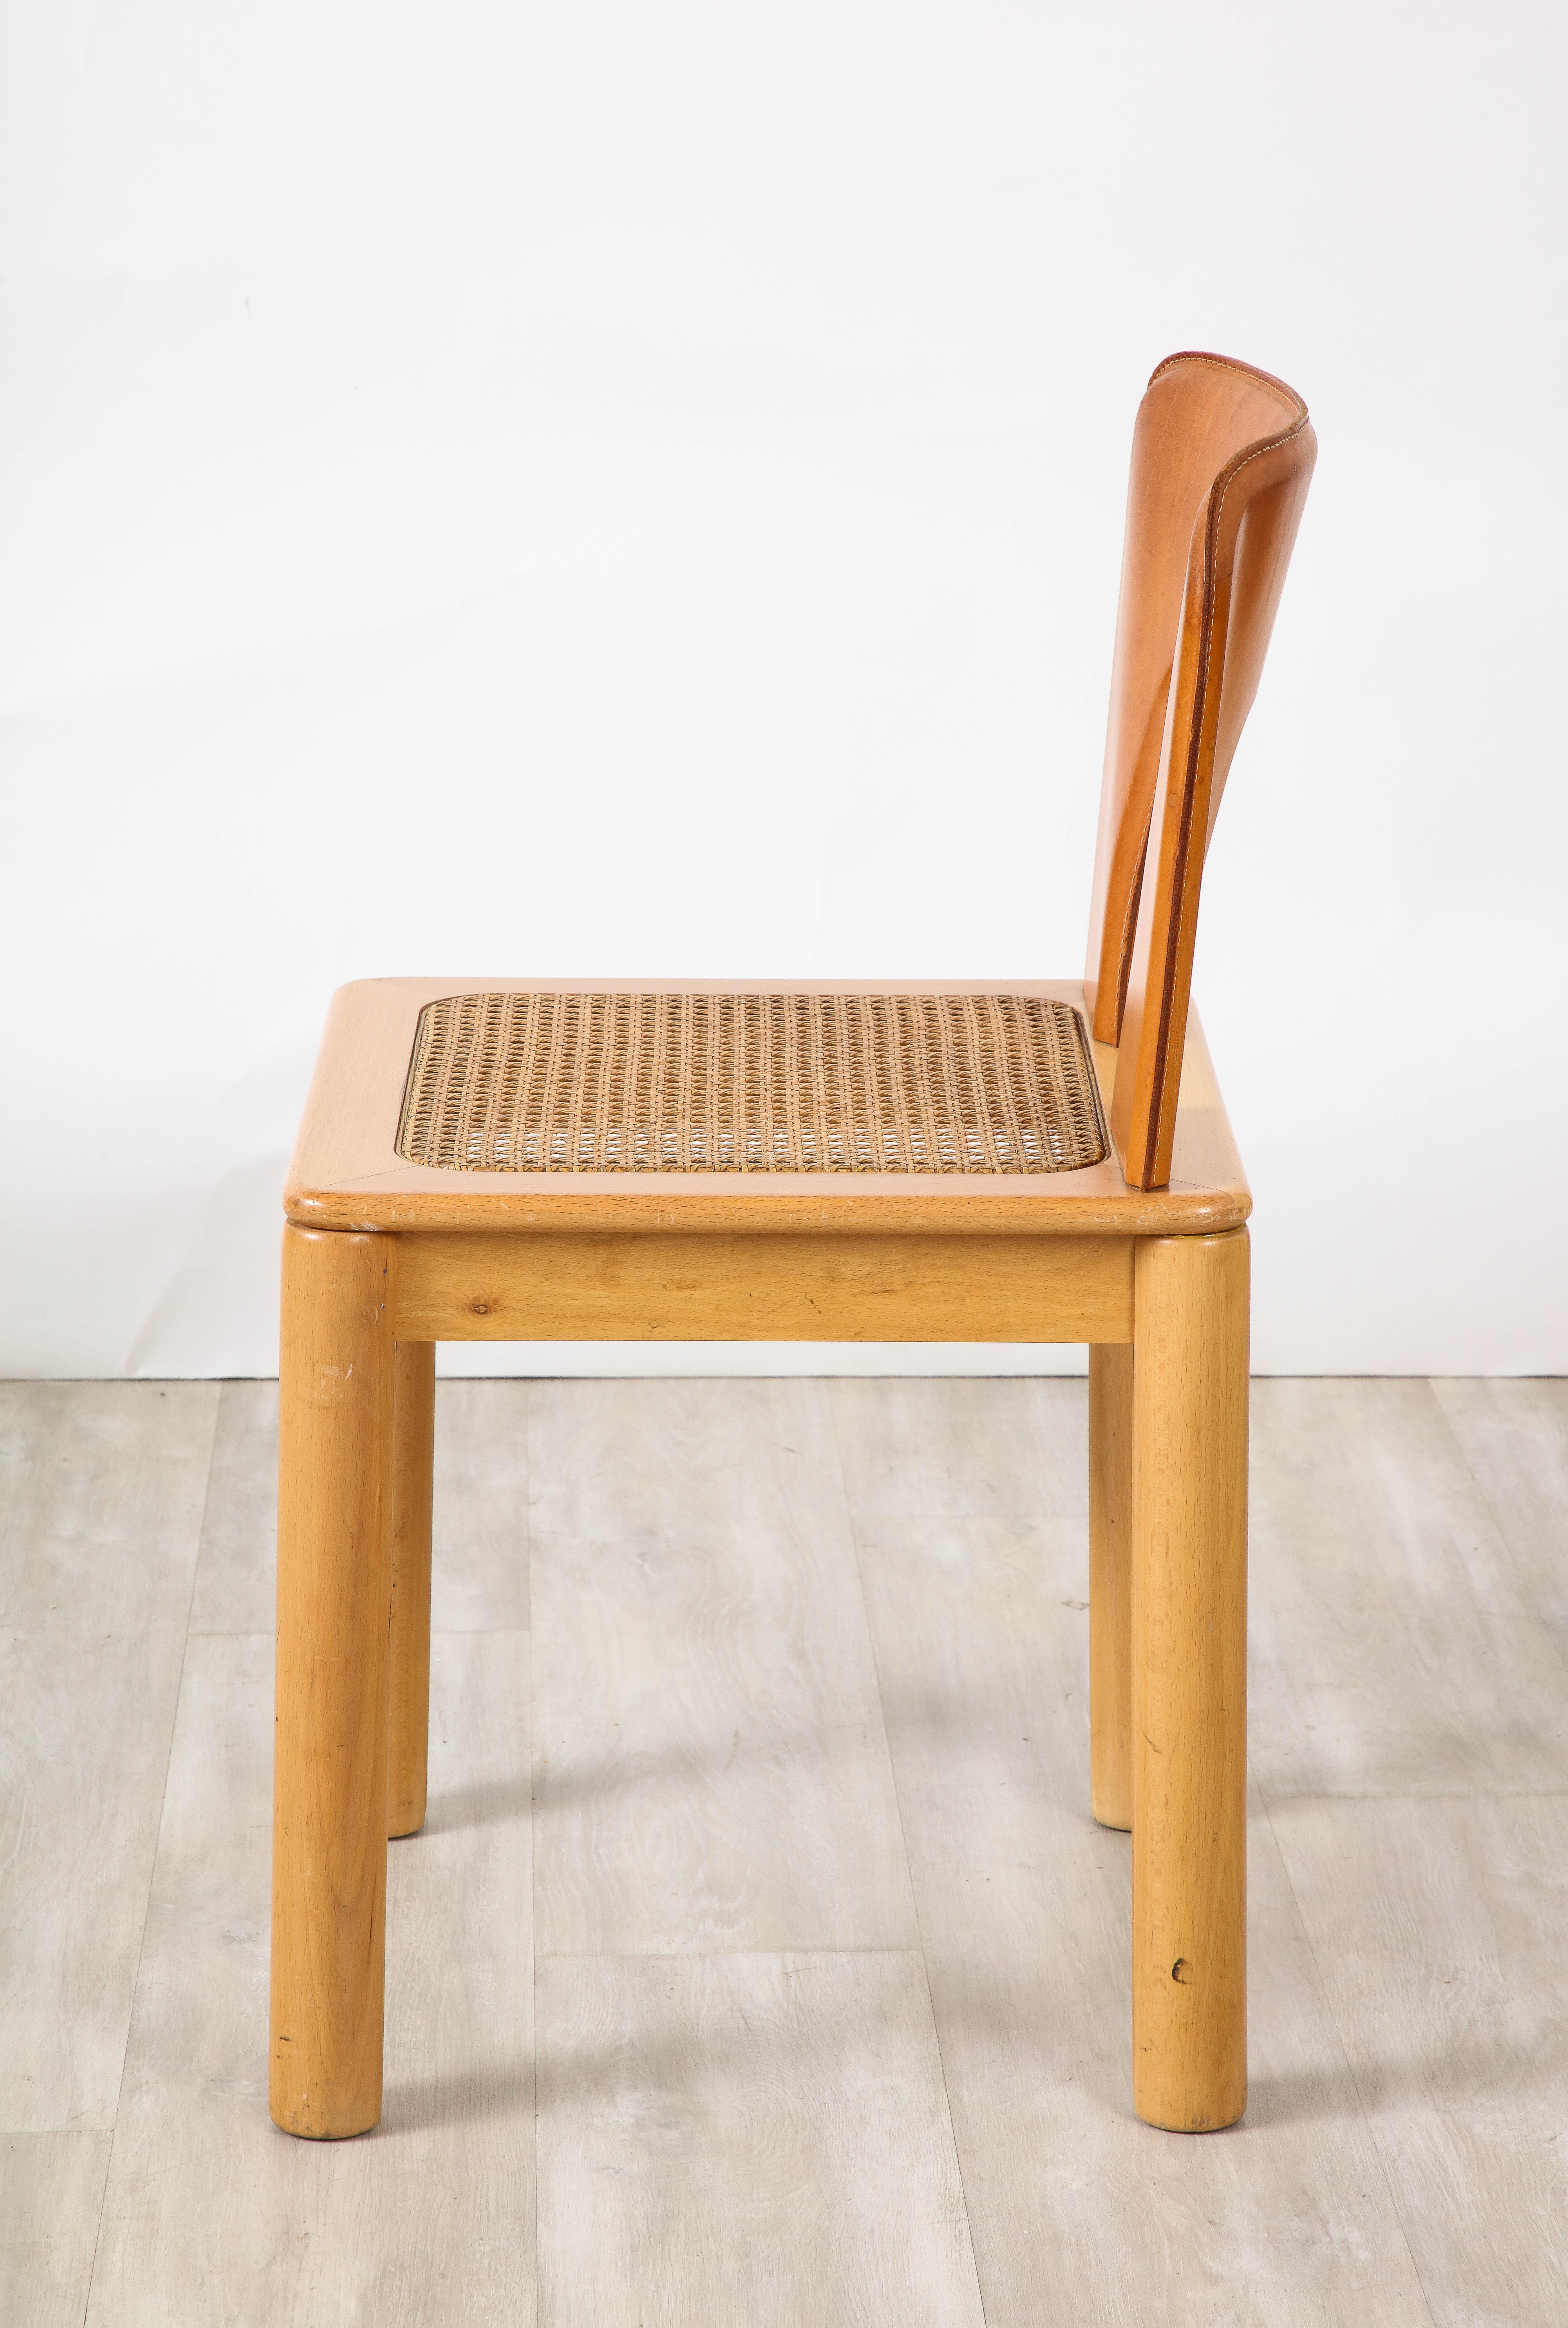 Italian 1970's Dining Chairs with Leather, Wood, Cane Seats, Italy, circa 1970 For Sale 12